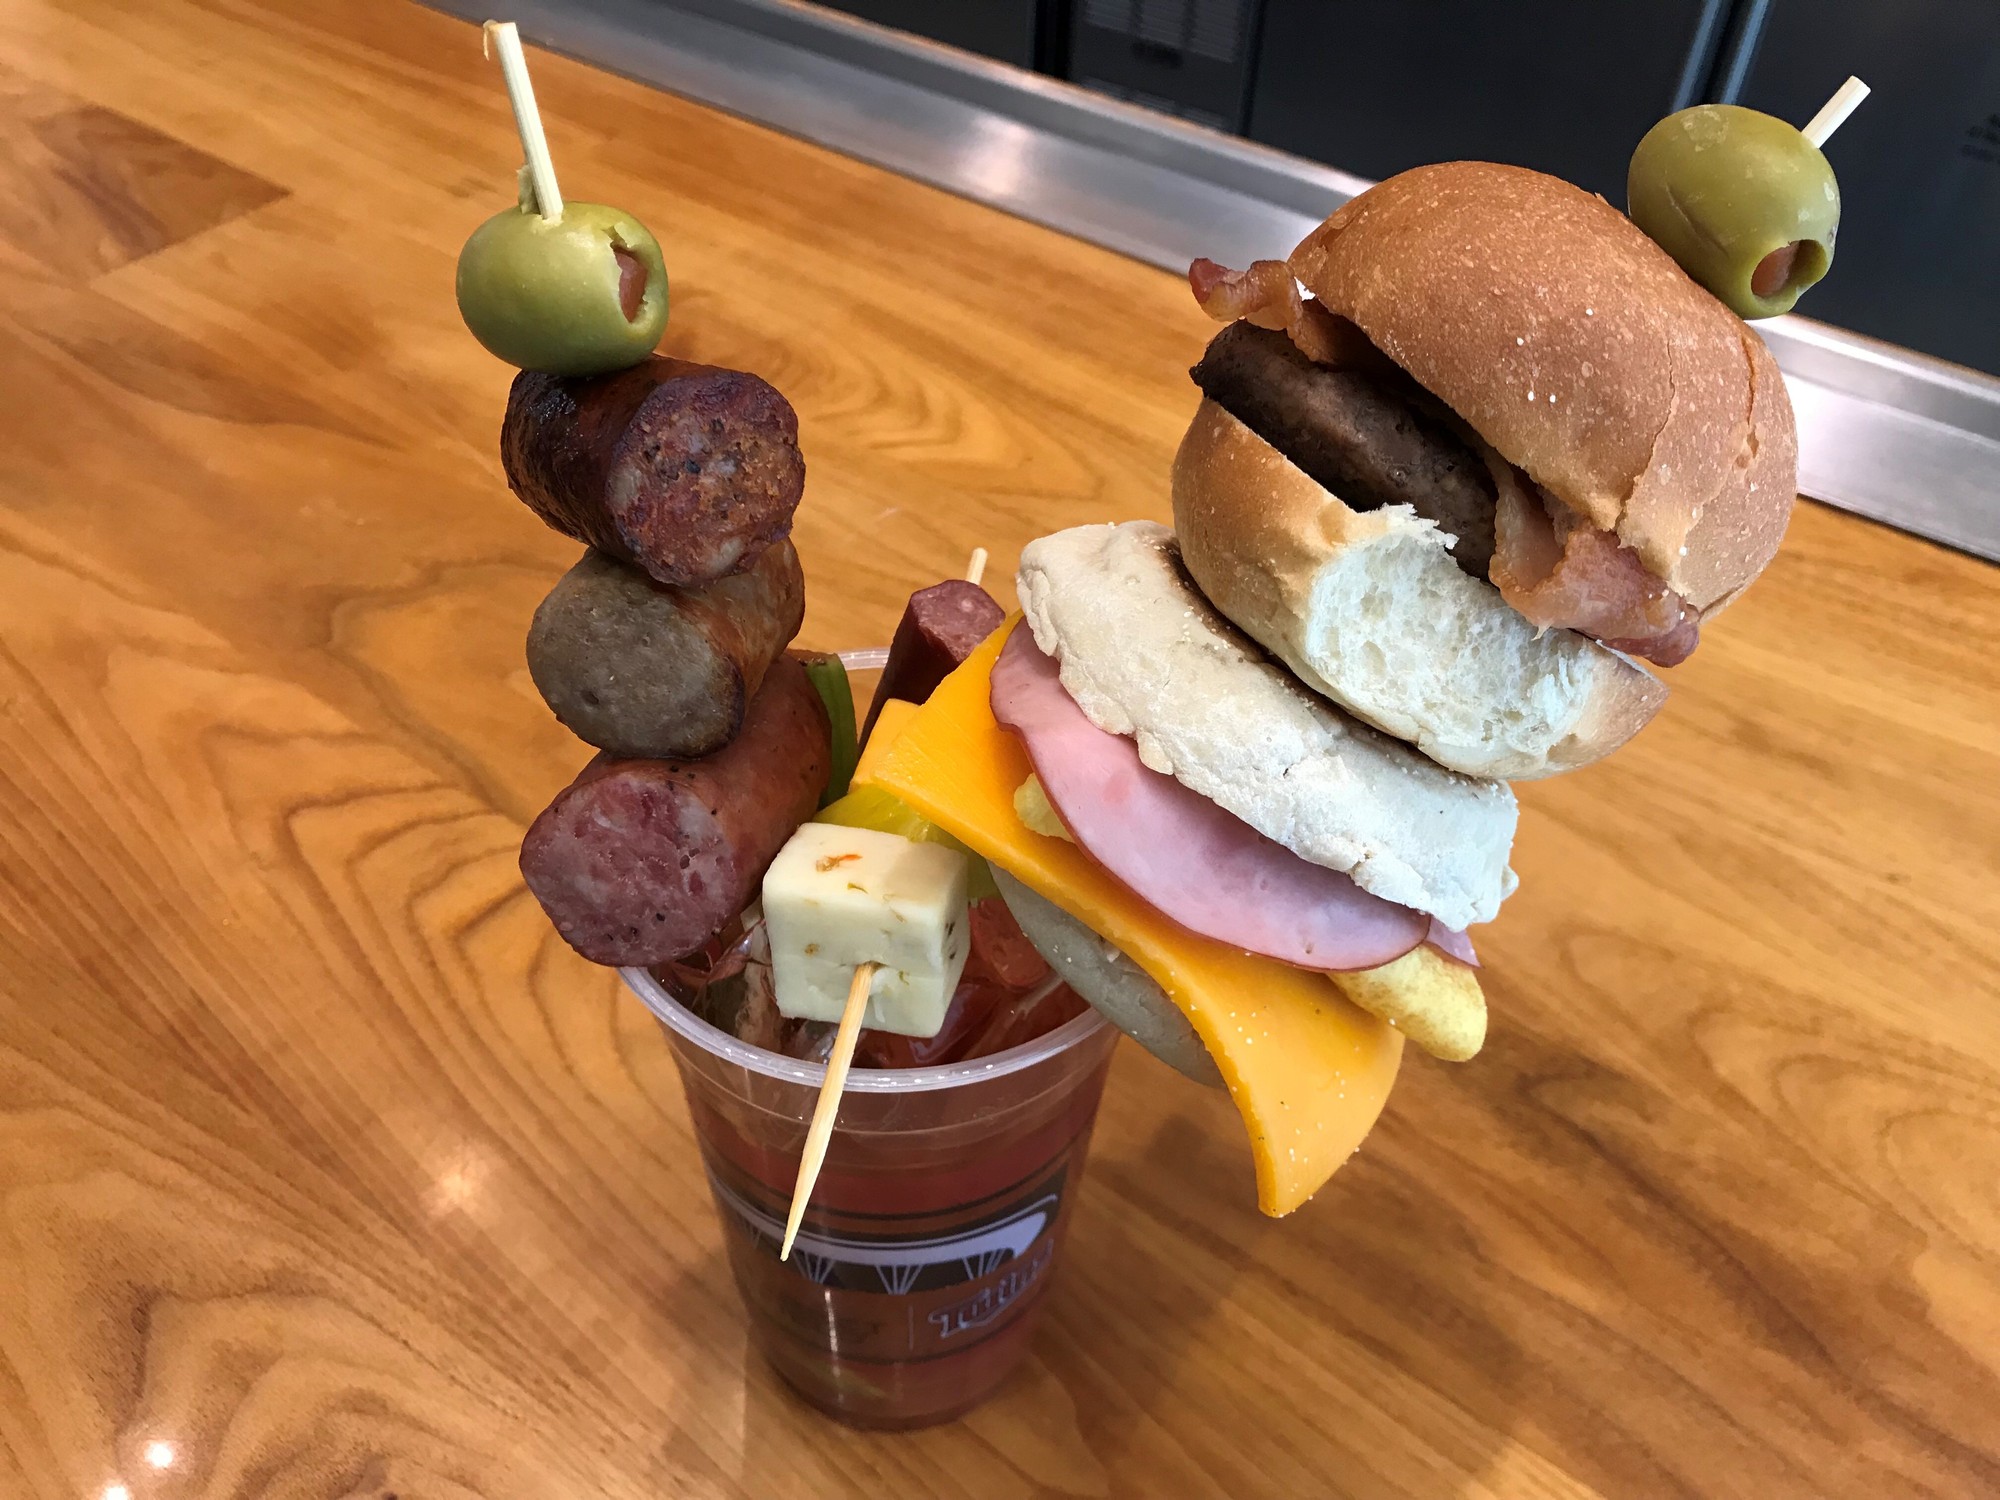 Follow those skewers down to find the new Bloody Mary at Target Field for 2018.